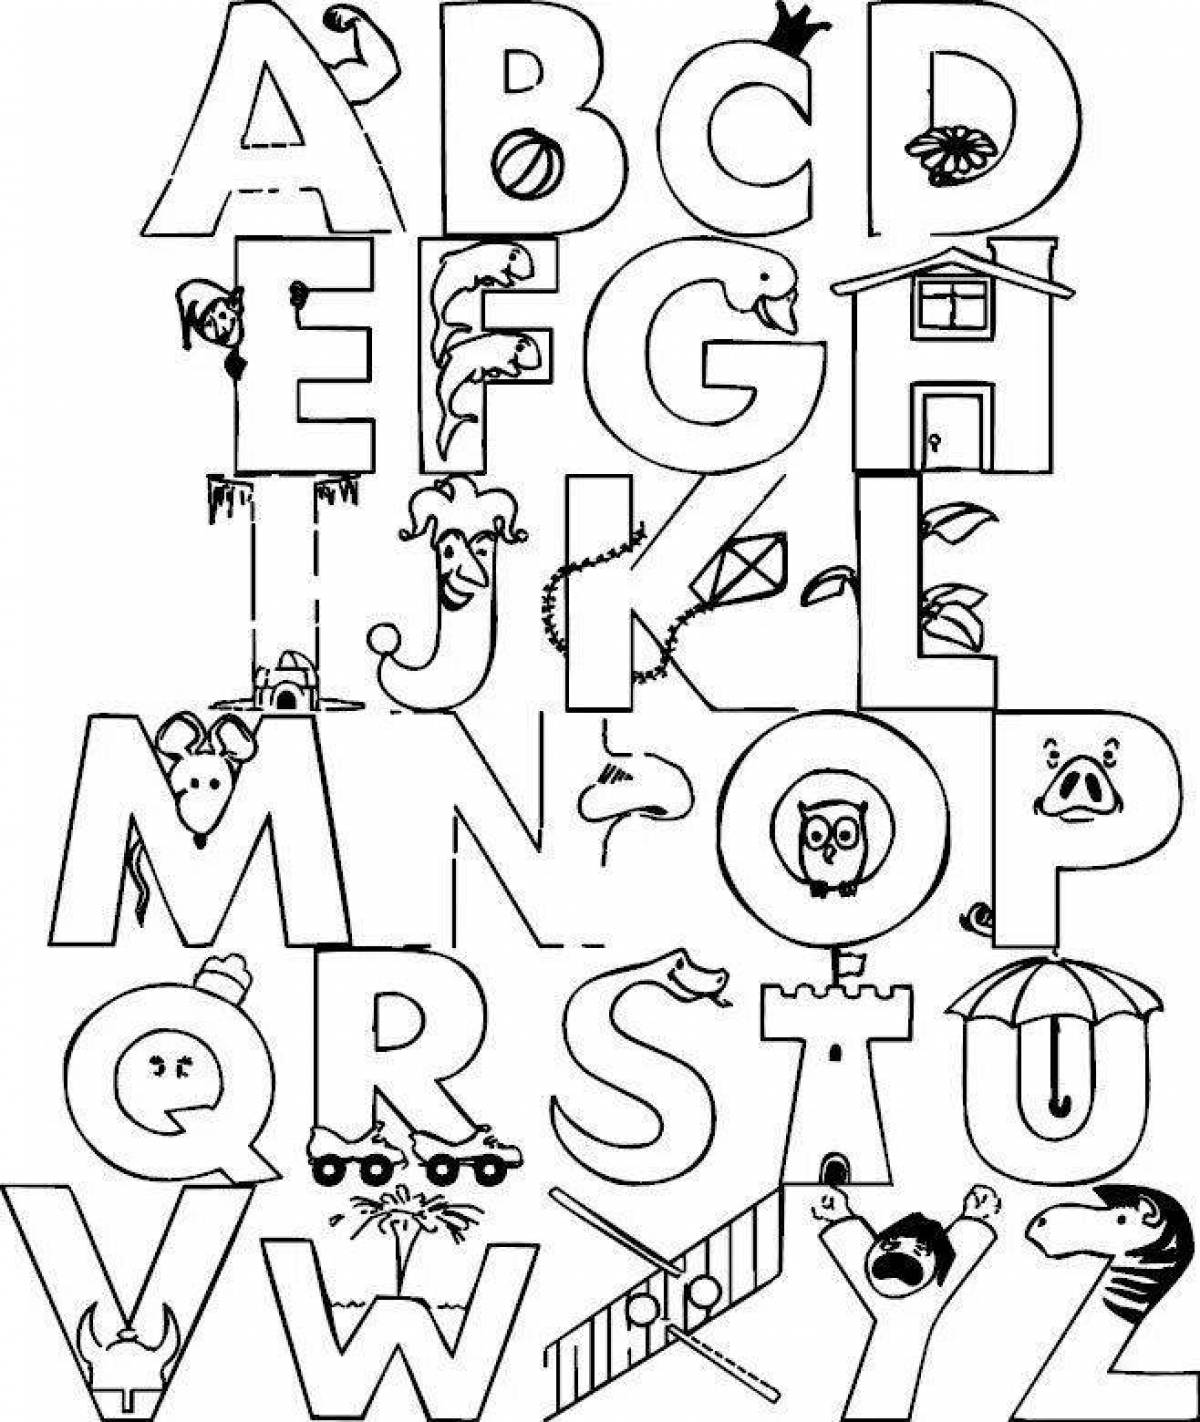 Coloring book with color alphabet